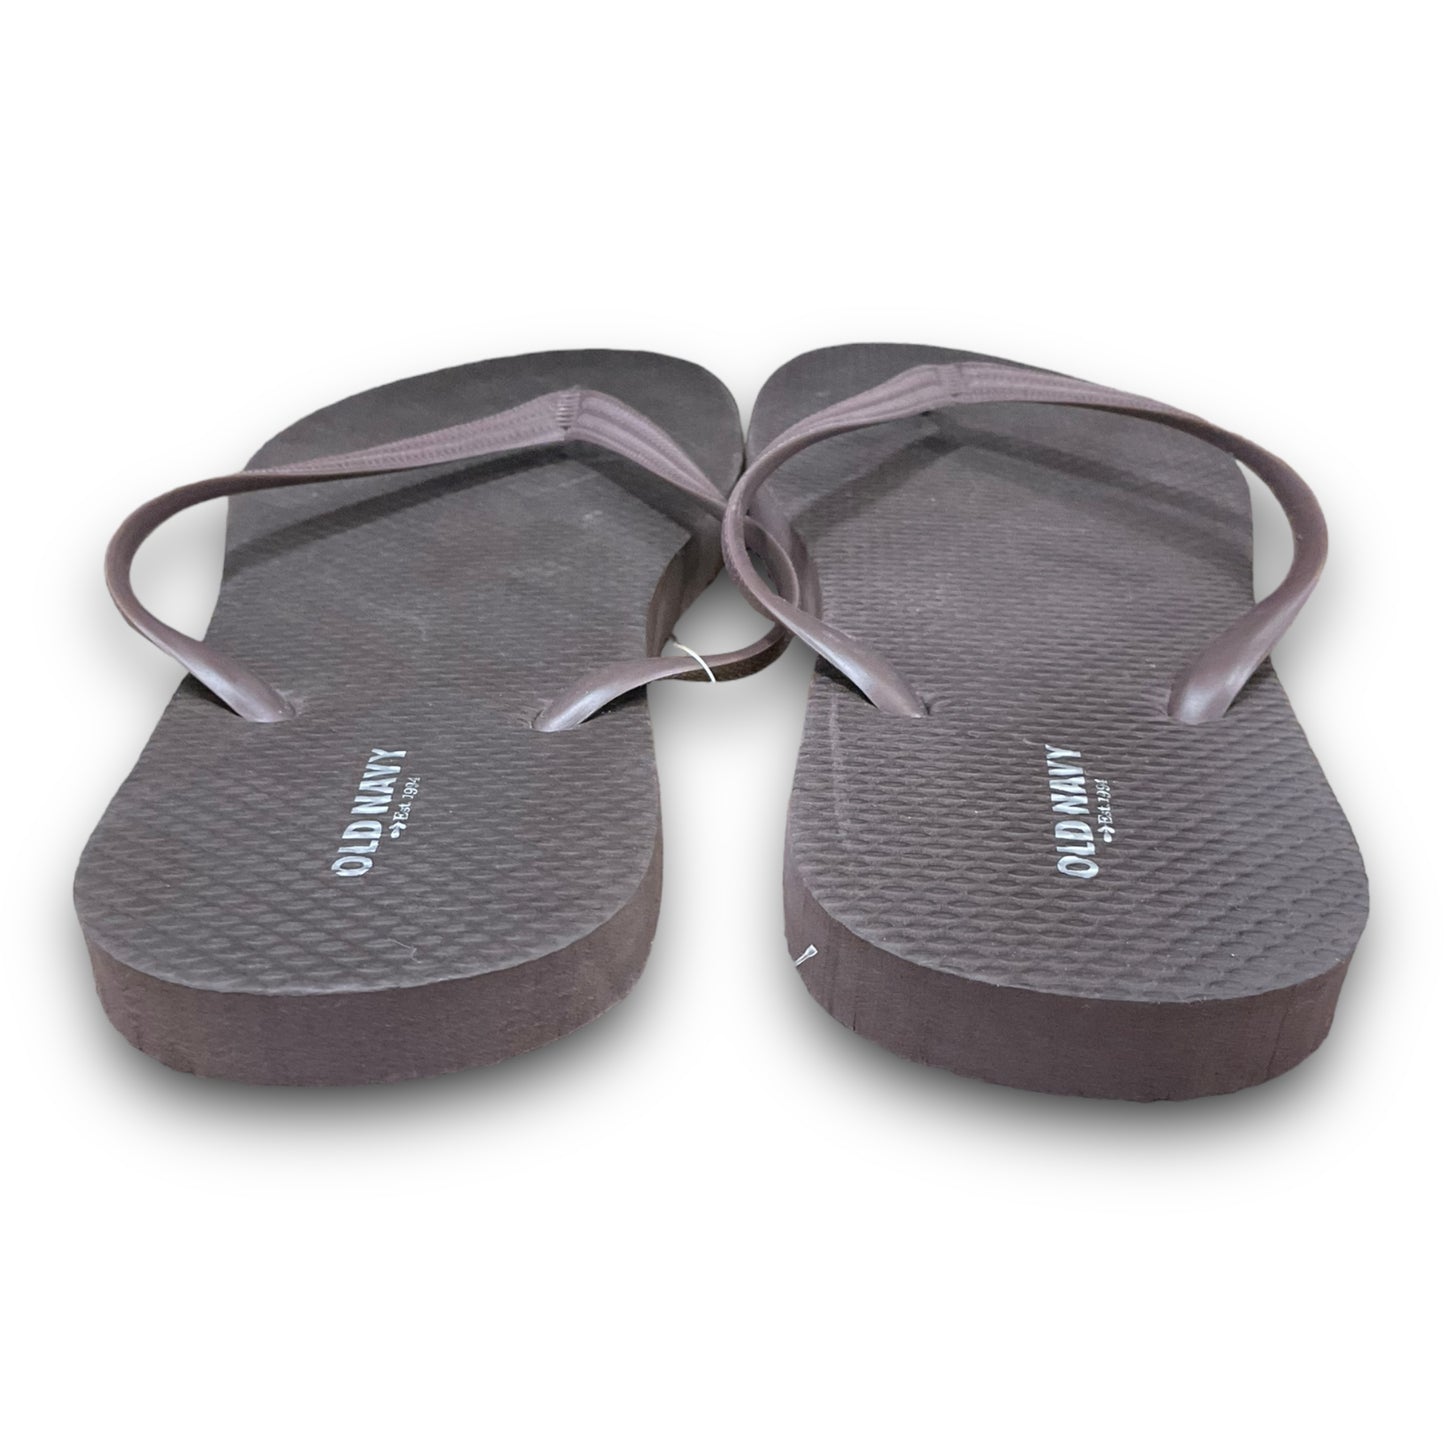 Sandals Flip Flops By Old Navy  Size: 10